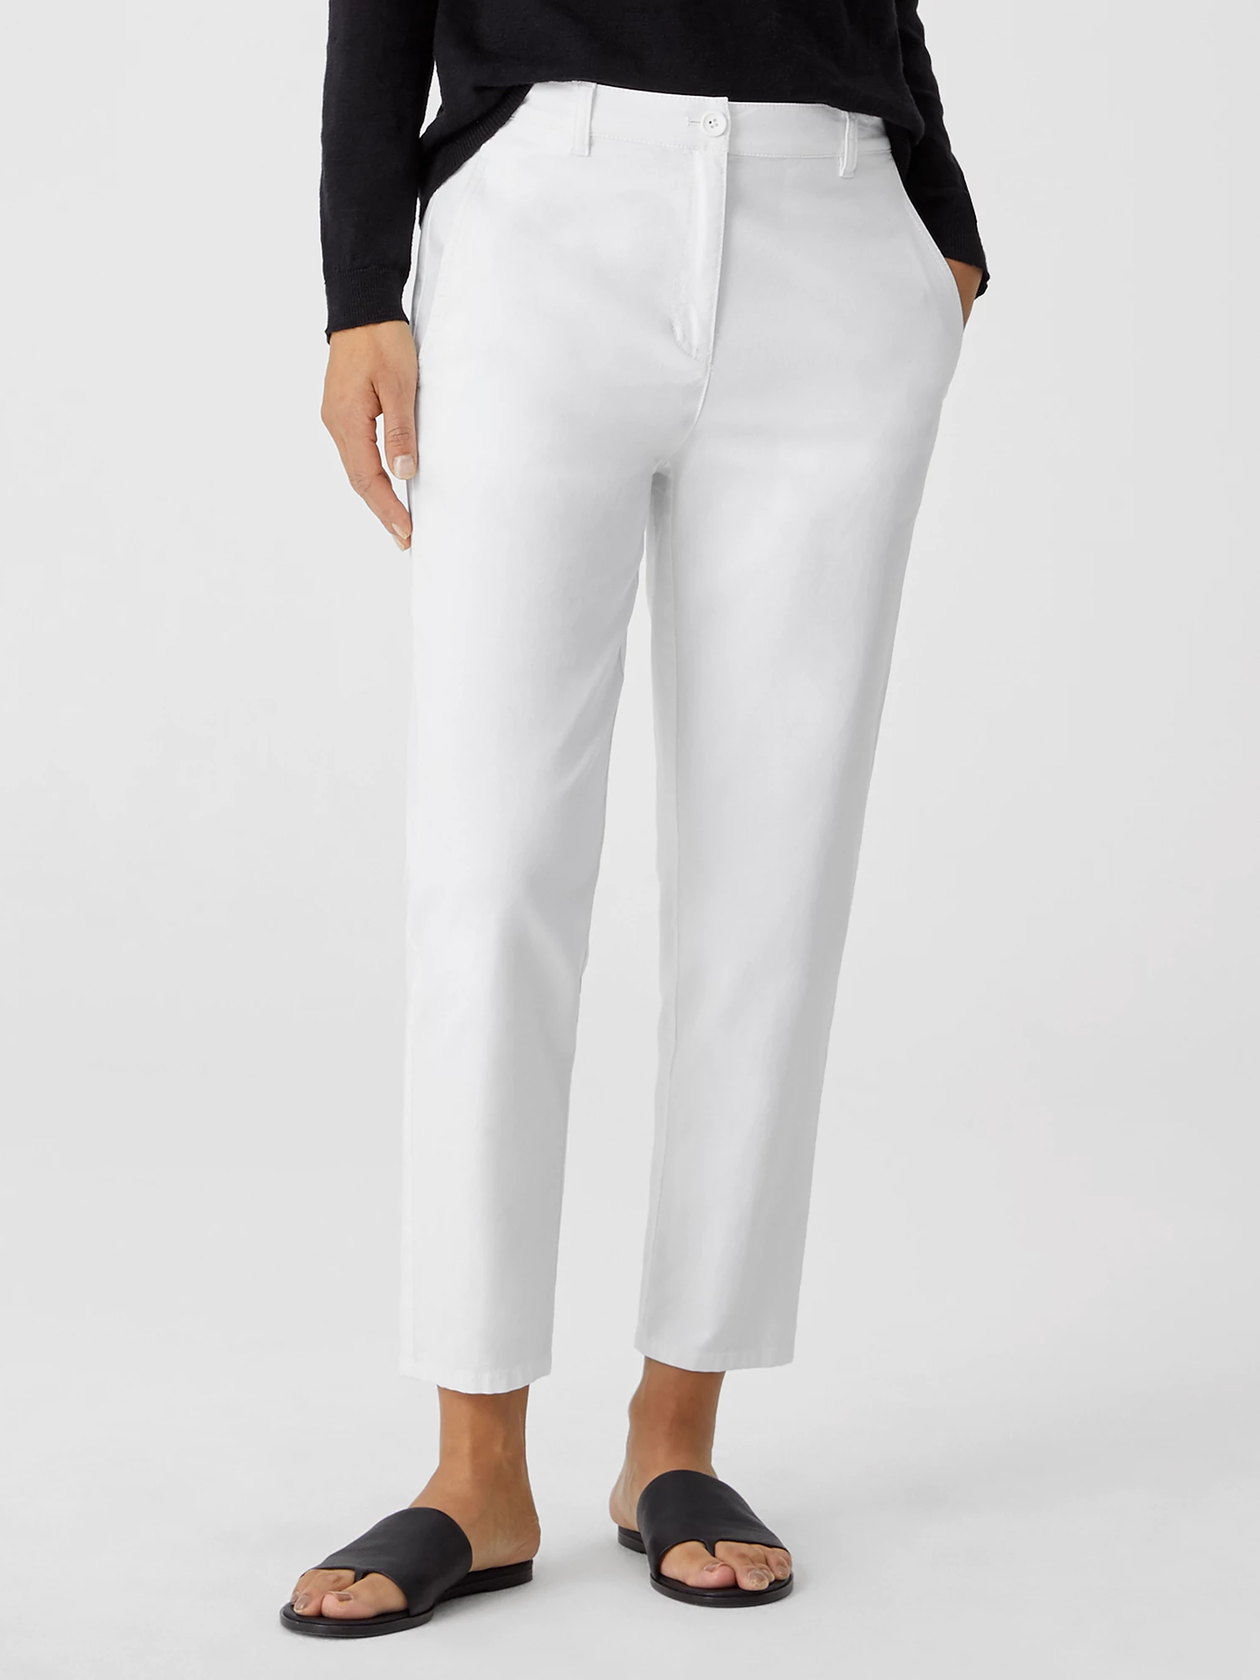 Organic Cotton Hemp Tapered Ankle Pant | EILEEN FISHER